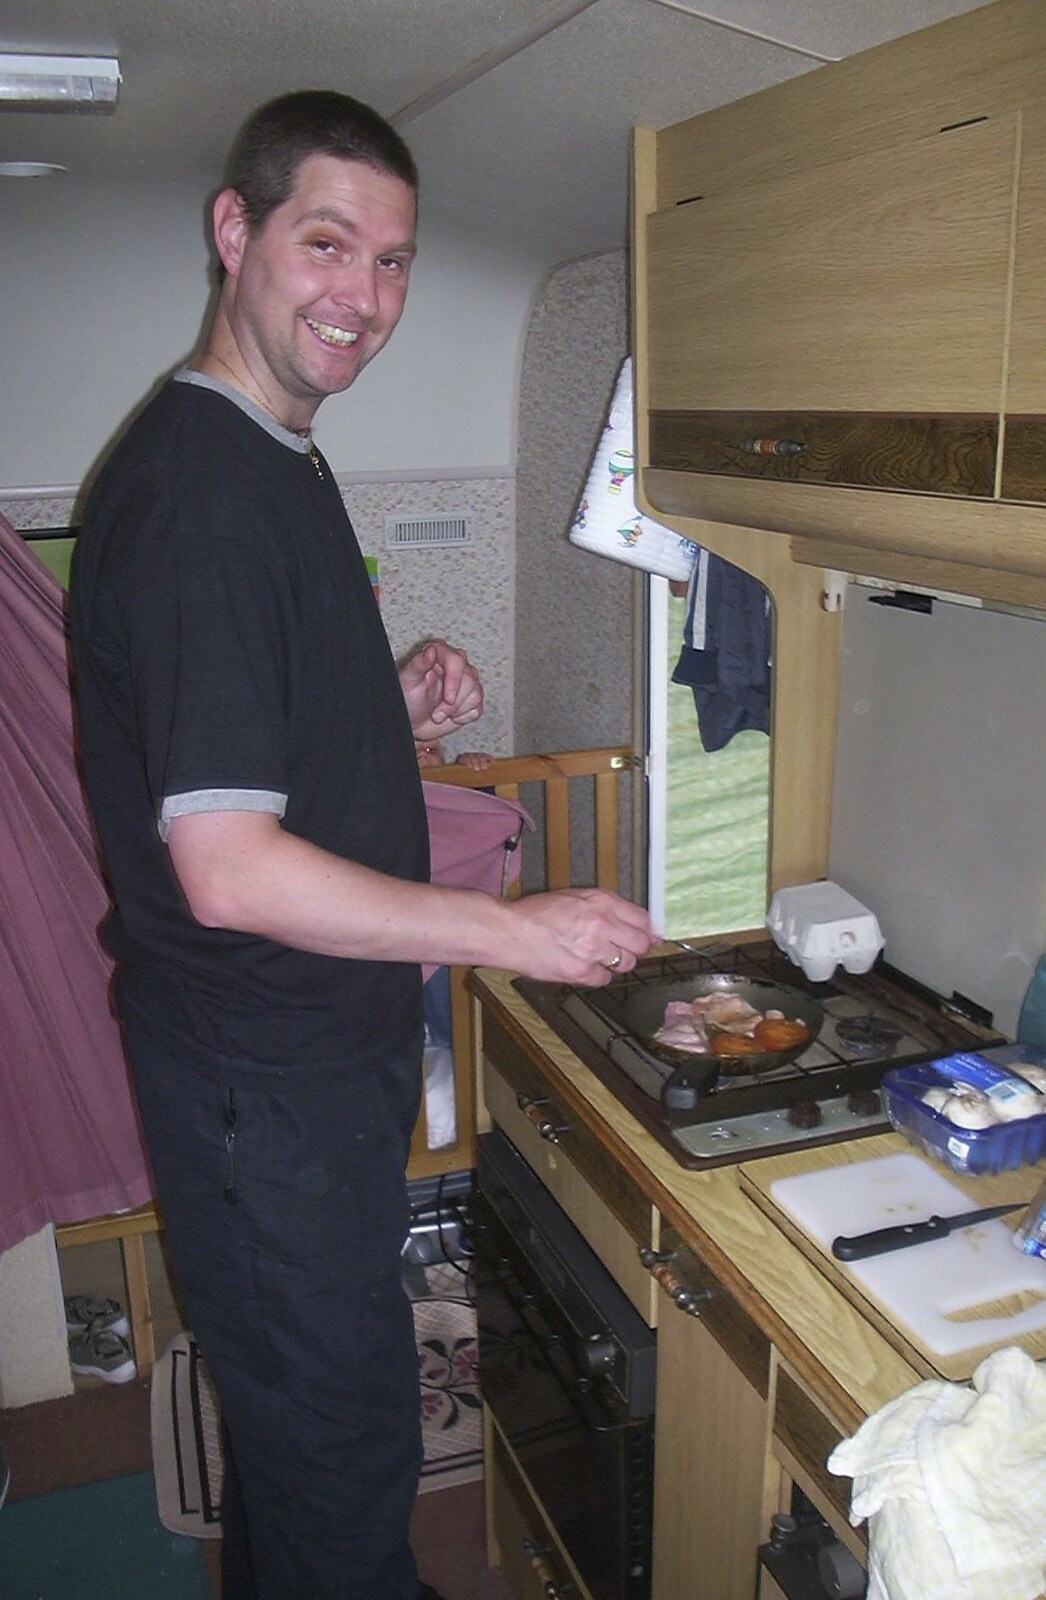 Corfe Castle Camping, Corfe, Dorset - 30th May 2004: Sean is also frying up